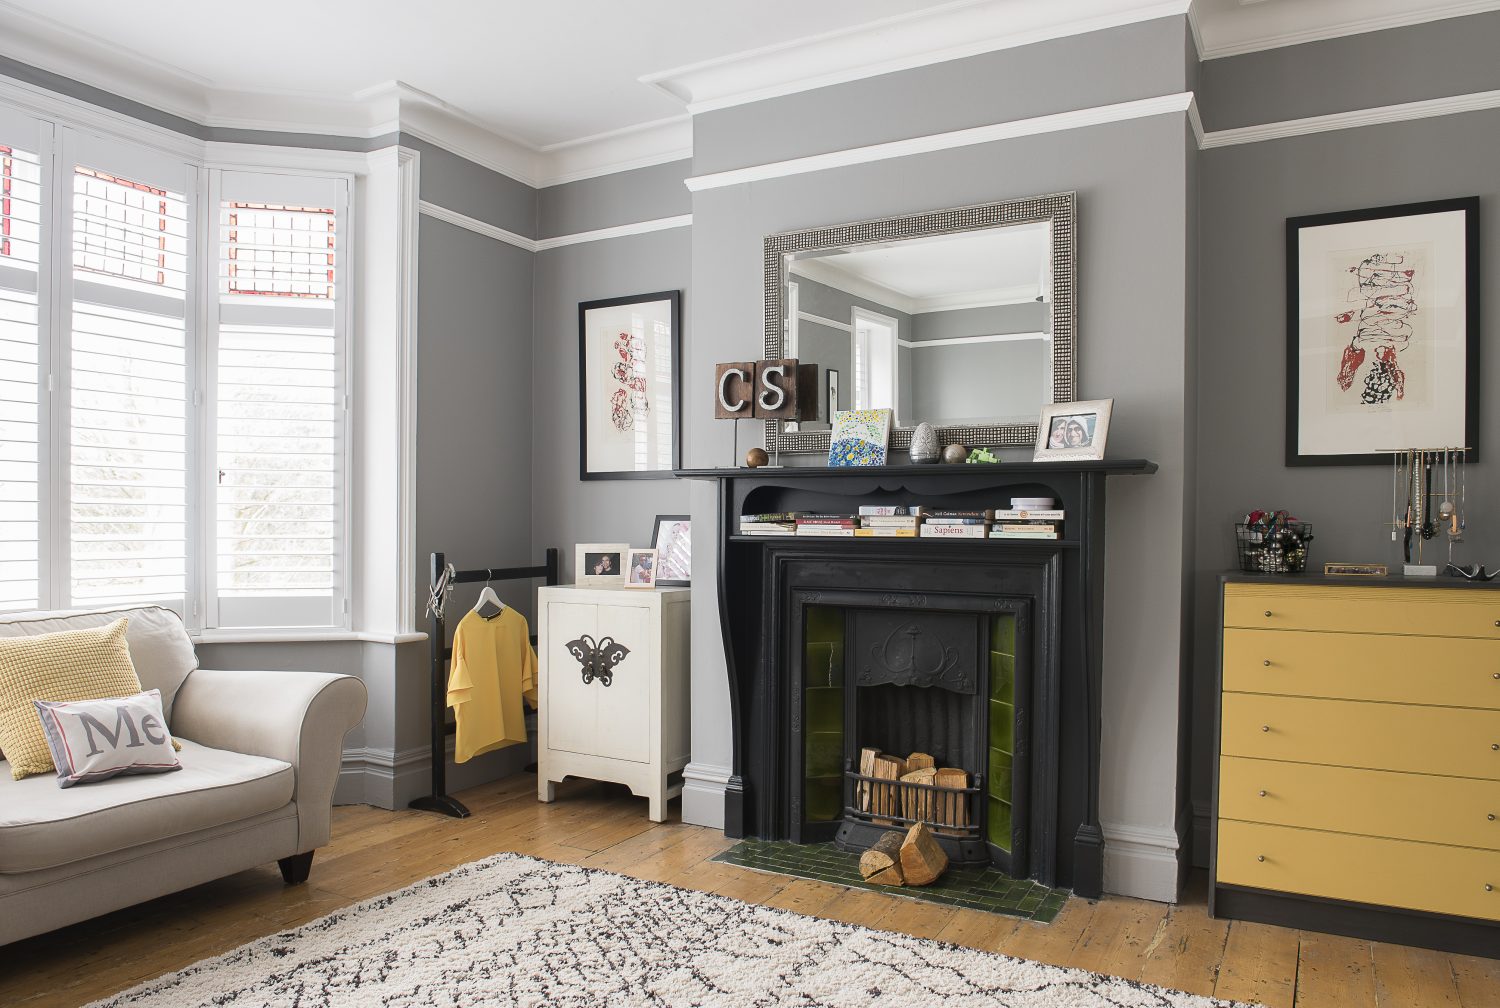 A brightly painted chest of drawers contrasts with the cool greys and blacks of the master bedroom